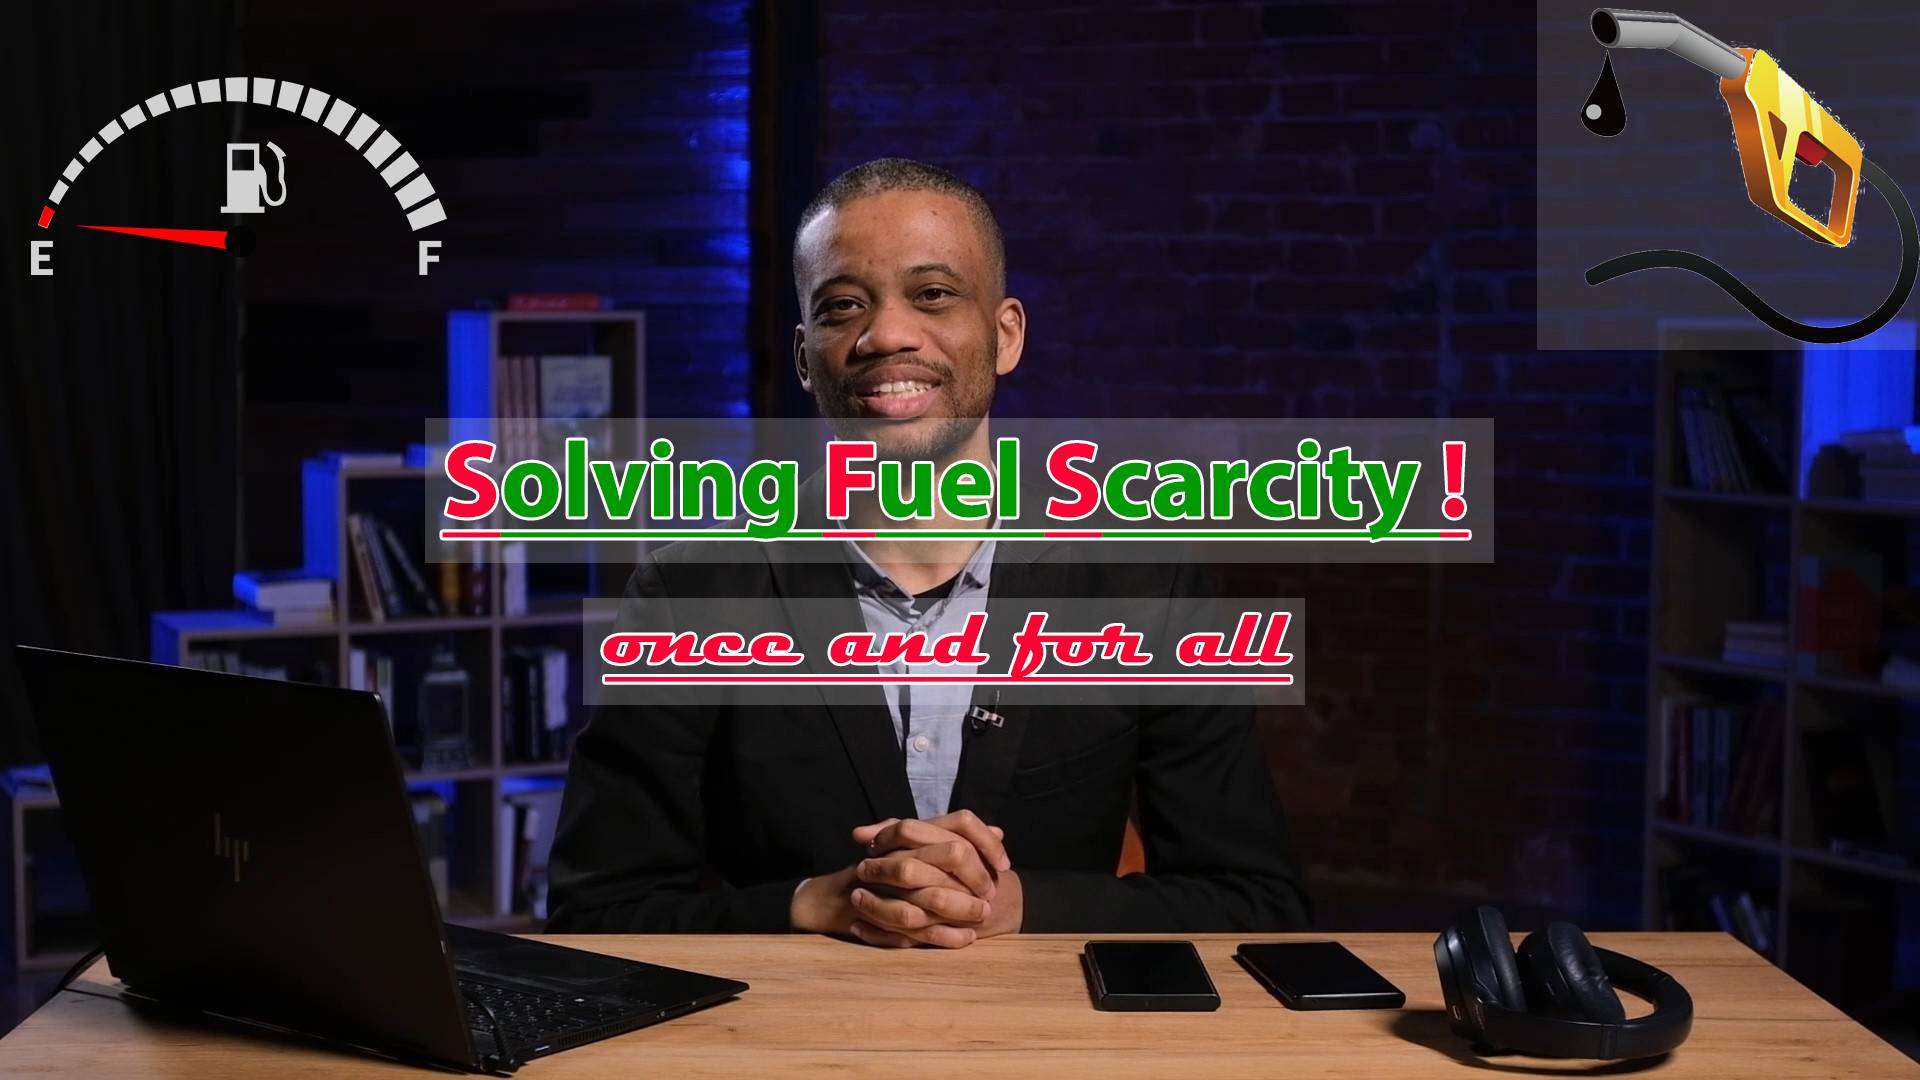 Solving Fuel Scarcity Once and For All